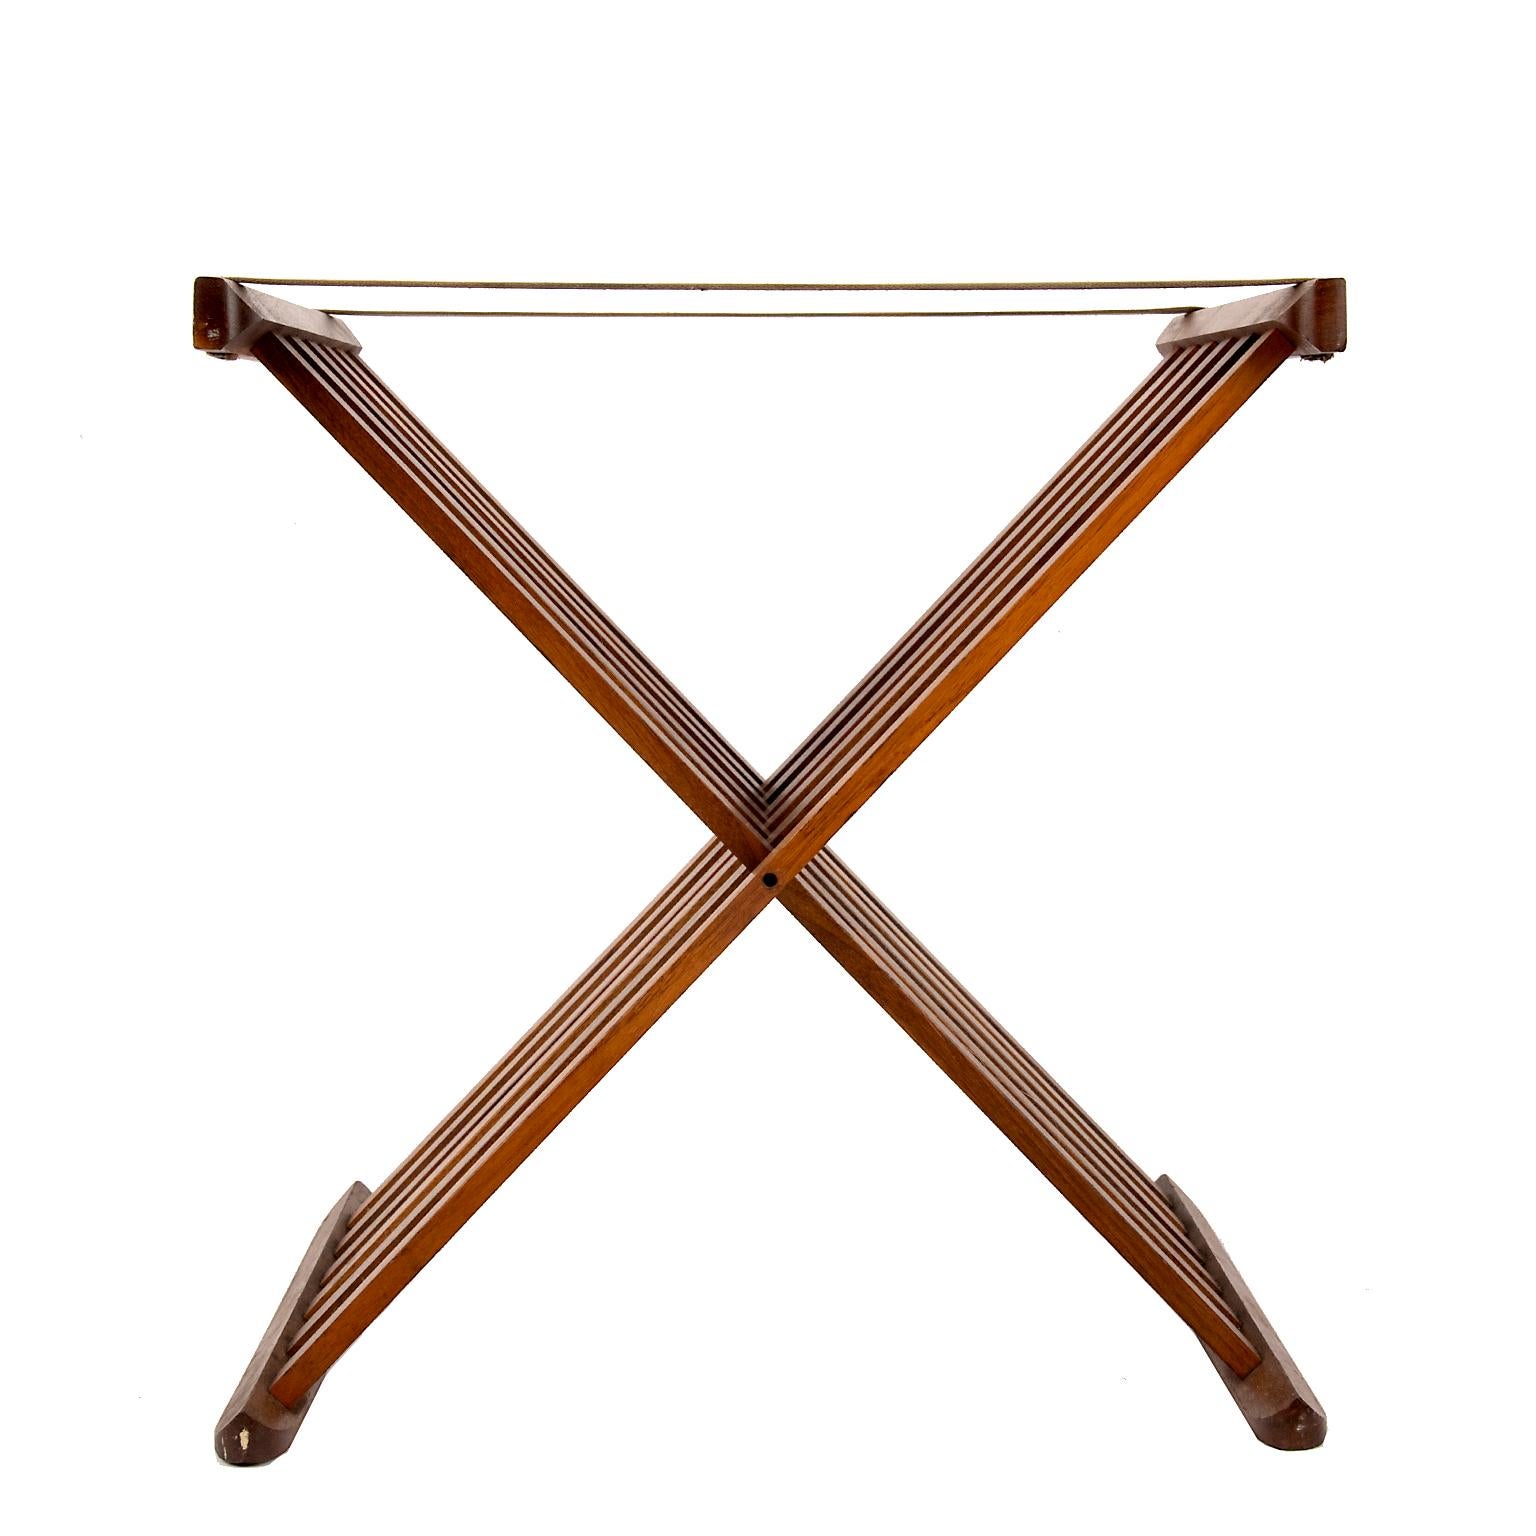 This classic x form folding teak wood stand is perfect for a large tray or as a chic luggage holder.
Change the straps to leather or some colorful fabric to add your own design to this timeless piece.